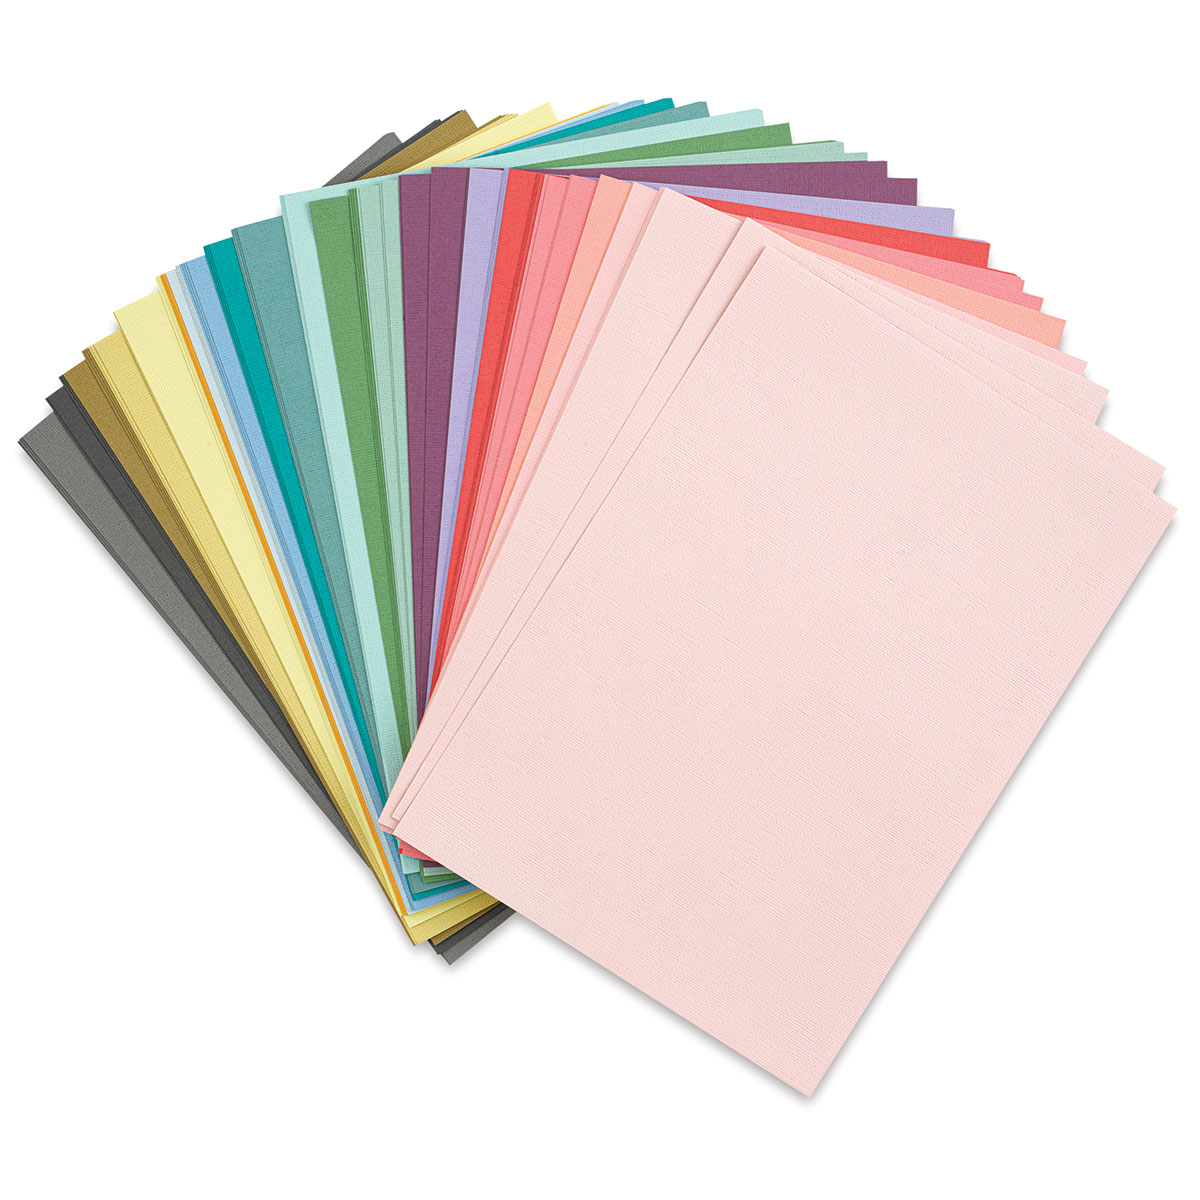 Over 100 Sheets! 8.5 x 11 Premium Quality CARDSTOCK PAPER - 21 Rainbow  Colors